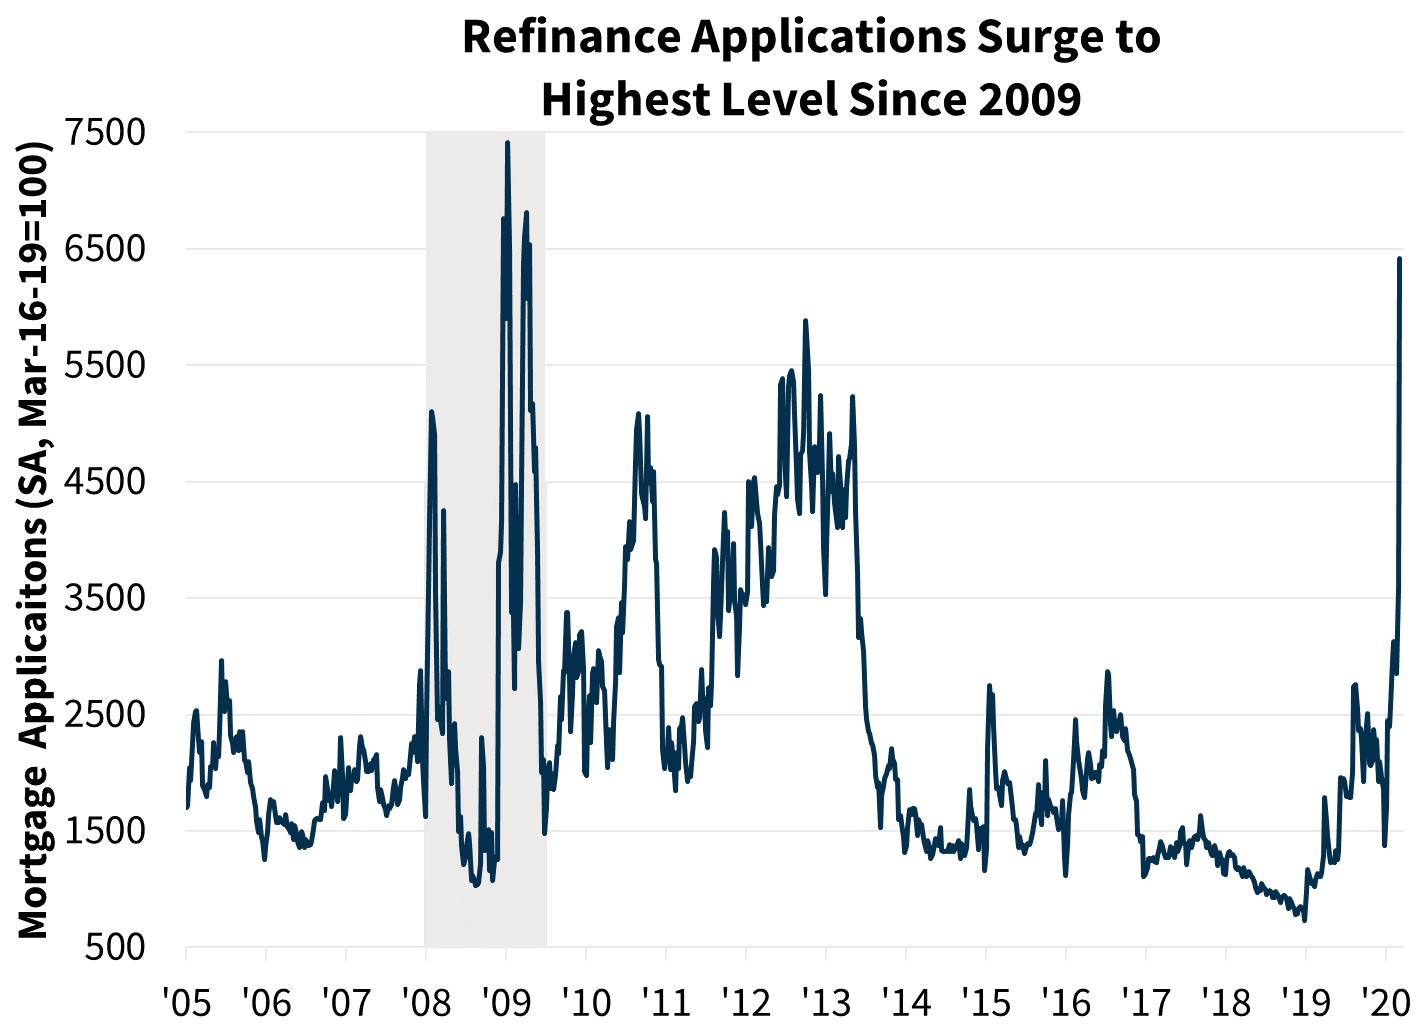 Refinance Applications Surge to Highest Level Since 2009